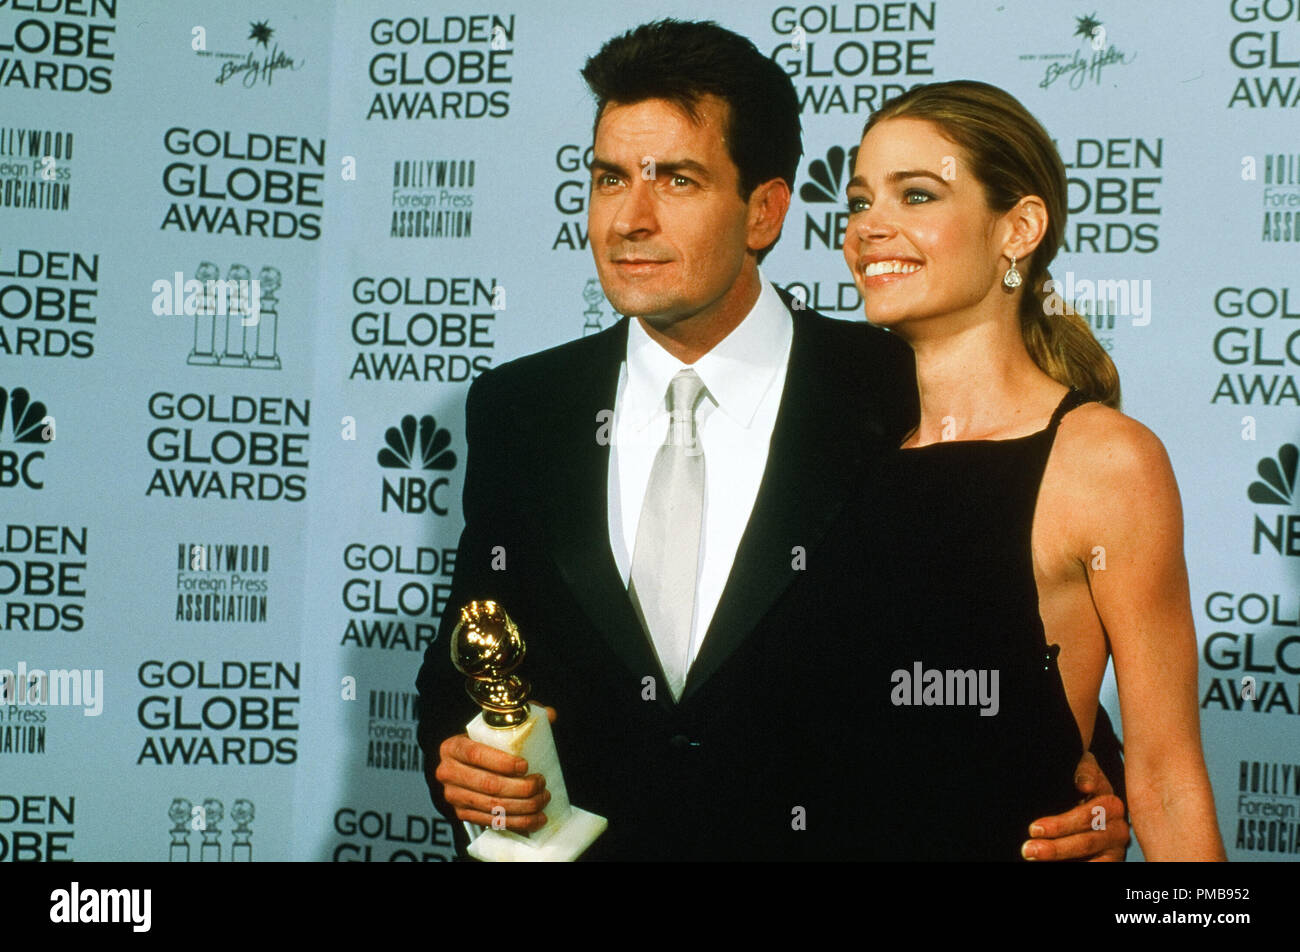 Denise Richards and Charlie Sheen at the 59th Annual Golden Globe Awards, 2002 File Reference # 32557 486THA Stock Photo